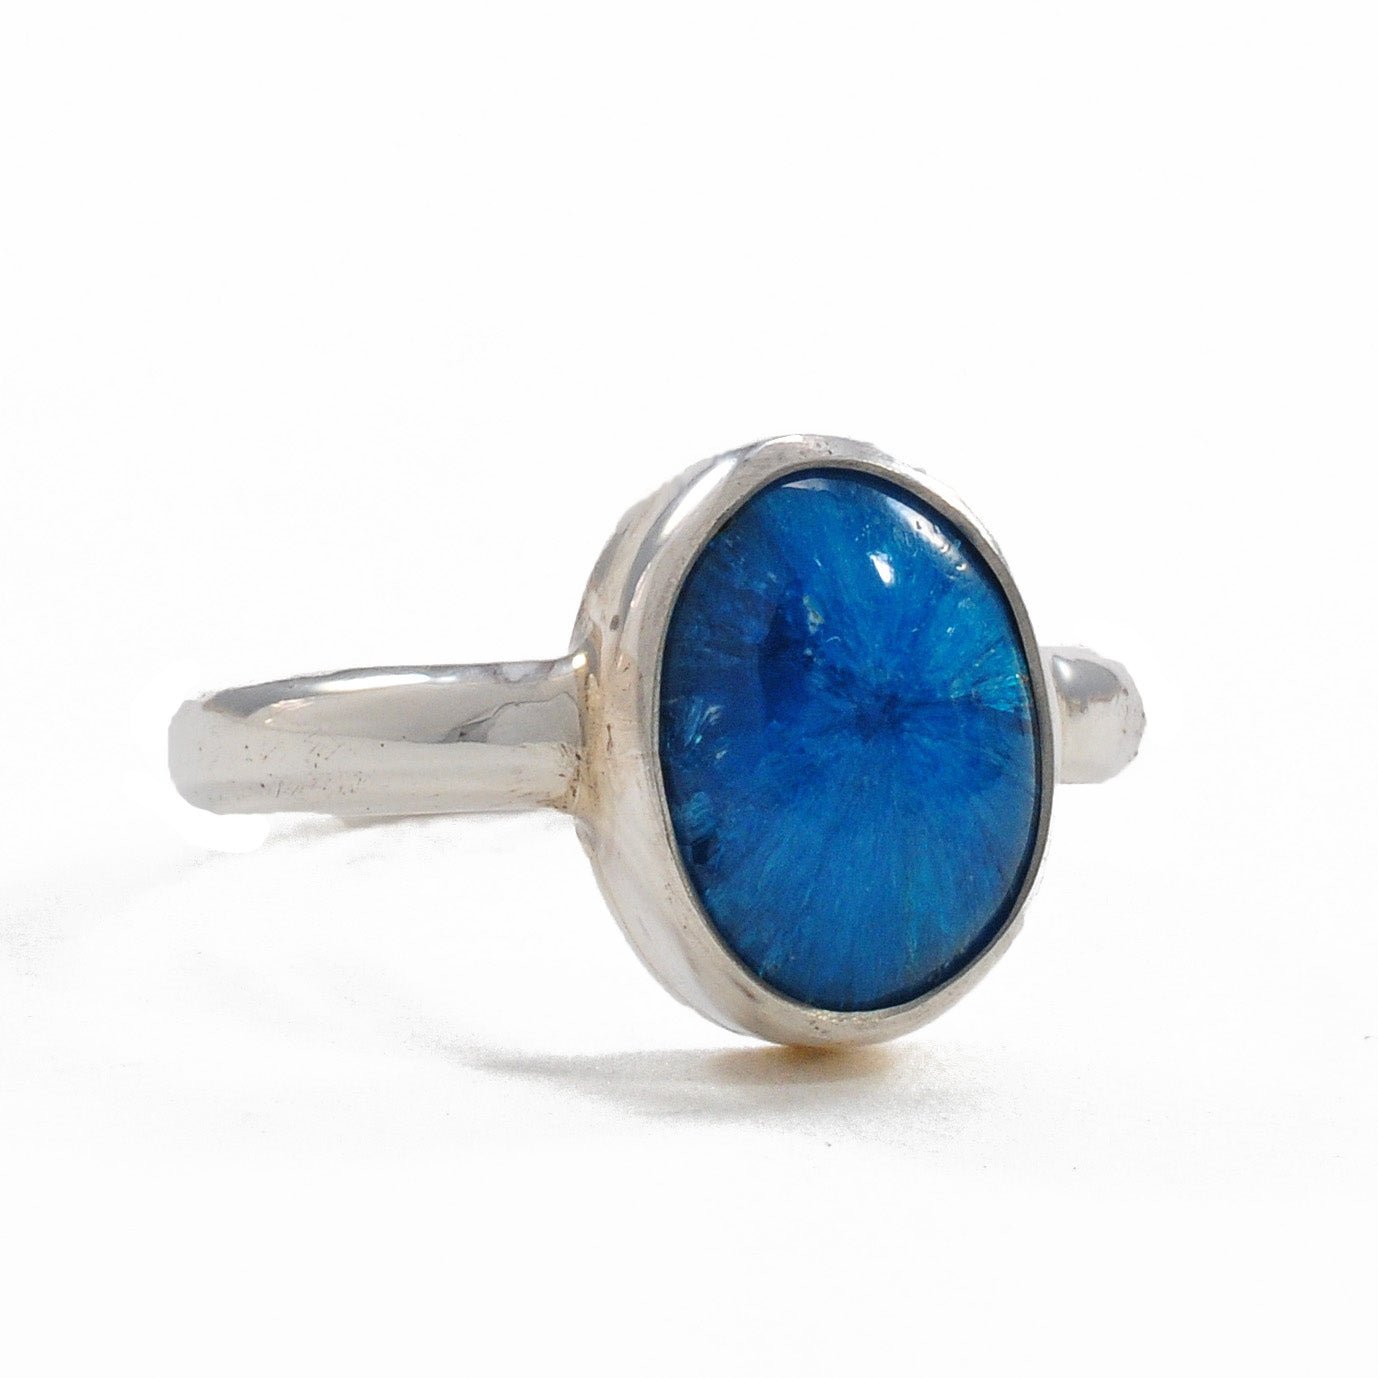 Cavansite 10.71 mm 3.04 ct Oval Cabochon Sterling Silver Handcrafted Ring - FFO-131 - Crystalarium